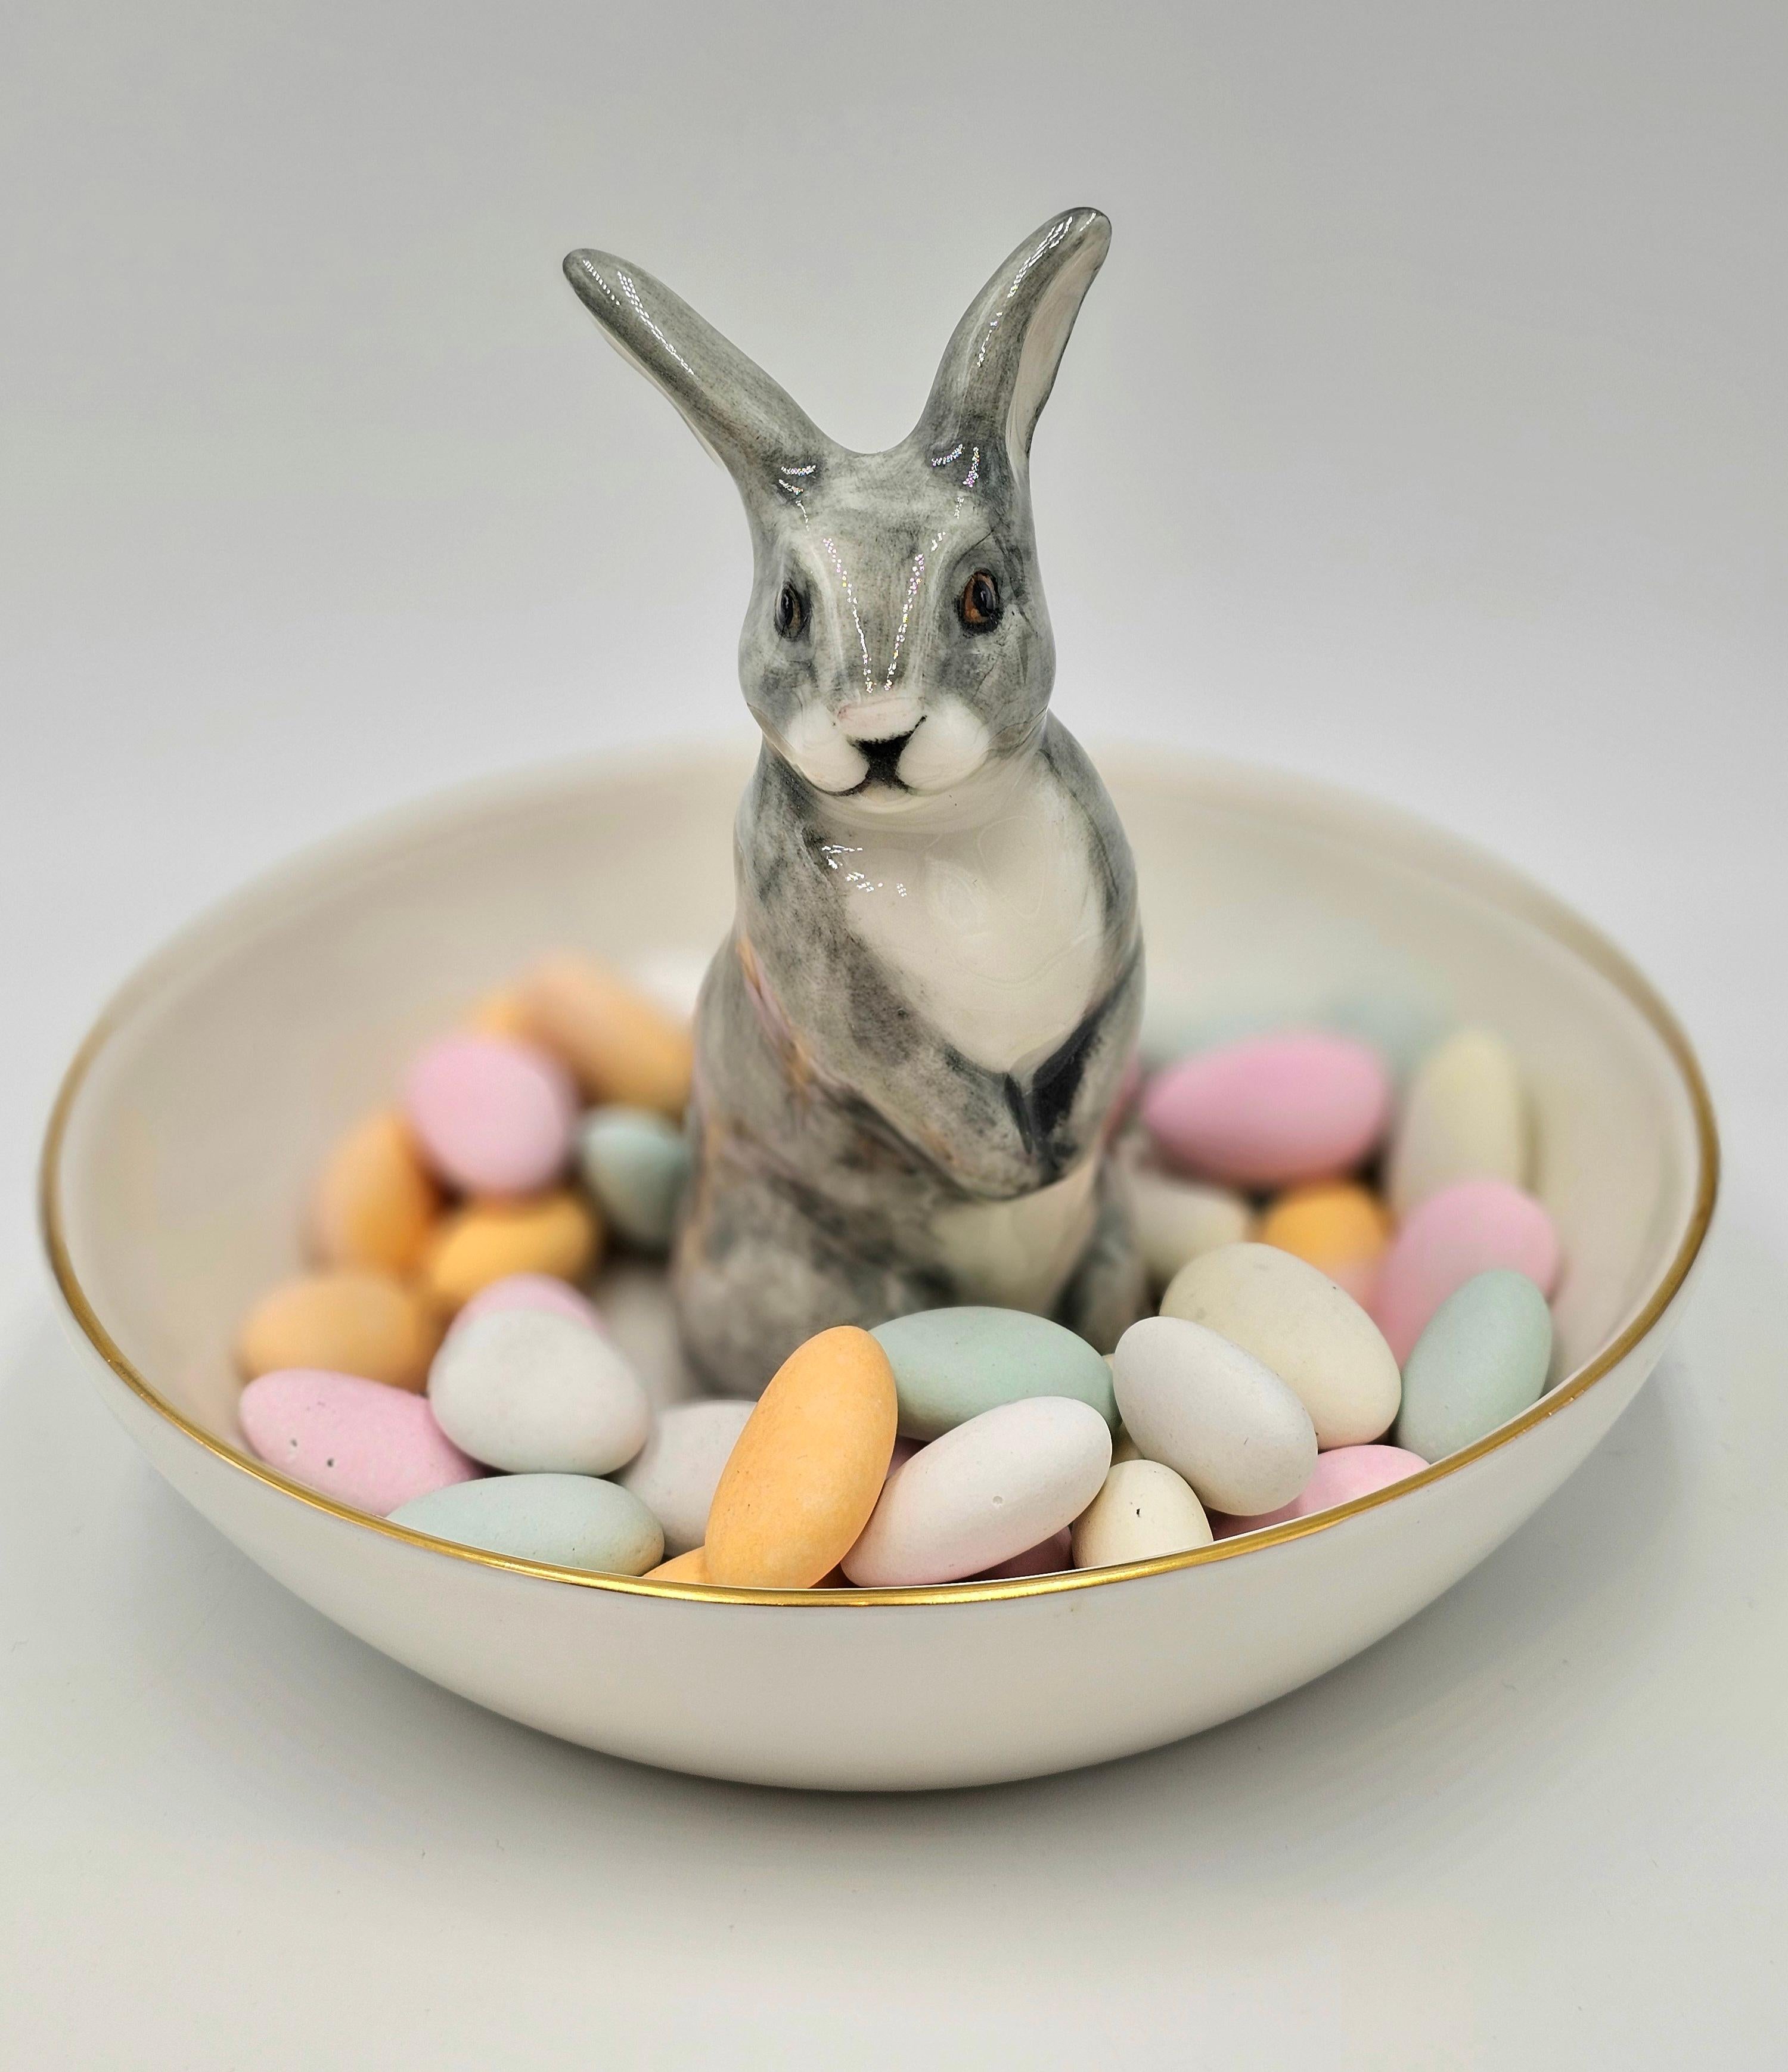 Completely handmade porcelain bowl with a hands-free naturalistic painted hare figure with grey spots. The Easter bunny is sitting in the middle of the bowl for decorating nuts or sweets around. Rimmed with a fine 24 carat gold line. Completely